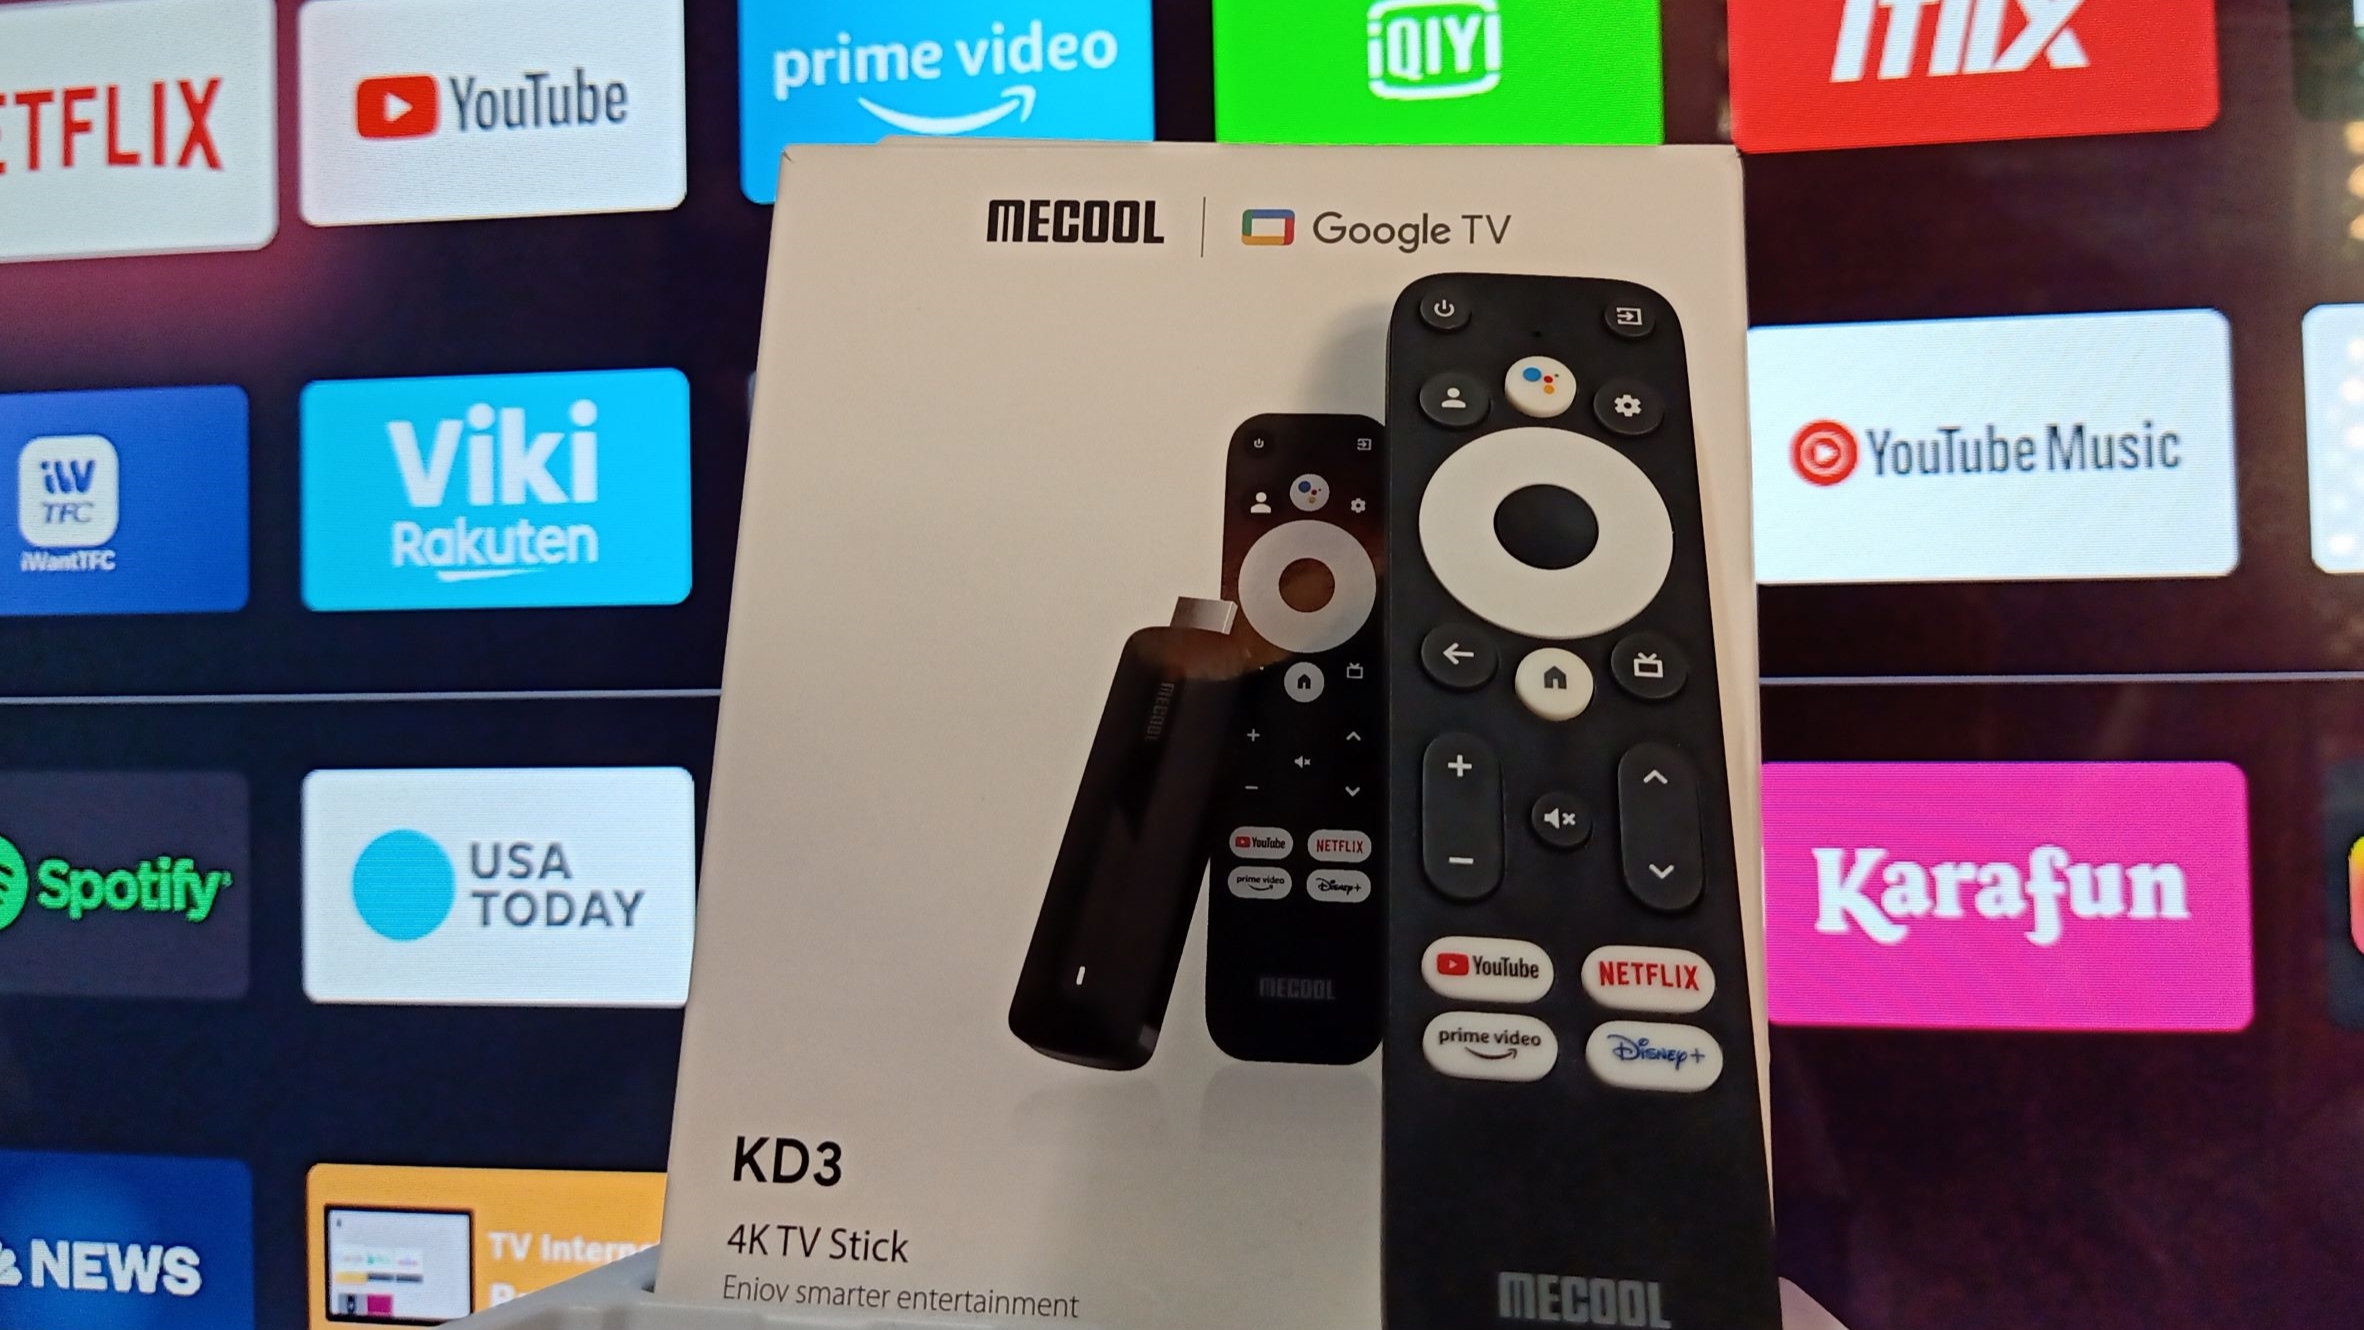 Mecool KD3 remote and box